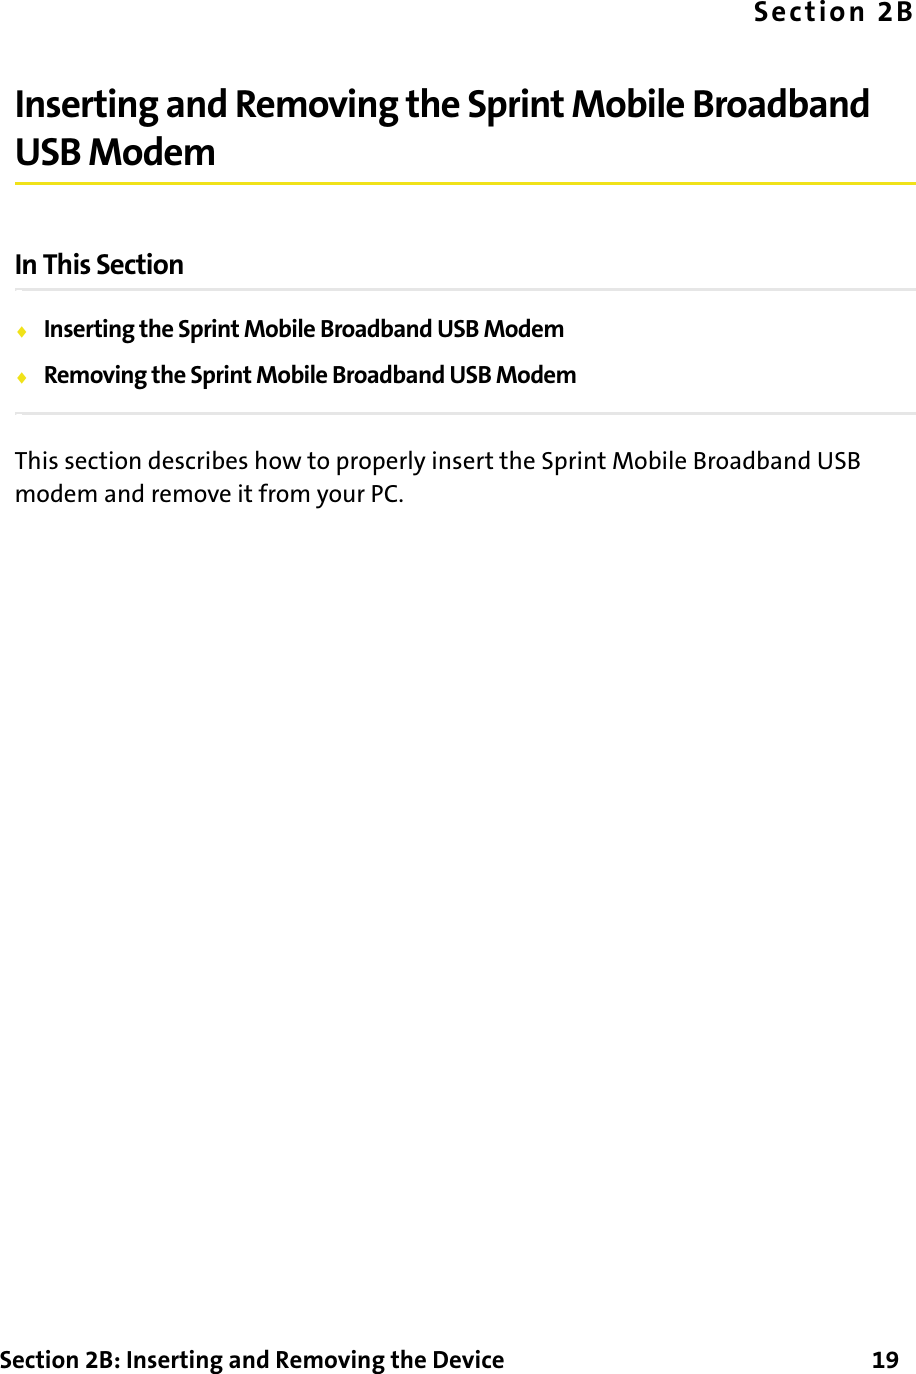 Section 2B: Inserting and Removing the Device      19Section 2BInserting and Removing the Sprint Mobile Broadband USB ModemIn This Section⽧Inserting the Sprint Mobile Broadband USB Modem⽧Removing the Sprint Mobile Broadband USB ModemThis section describes how to properly insert the Sprint Mobile Broadband USB modem and remove it from your PC.